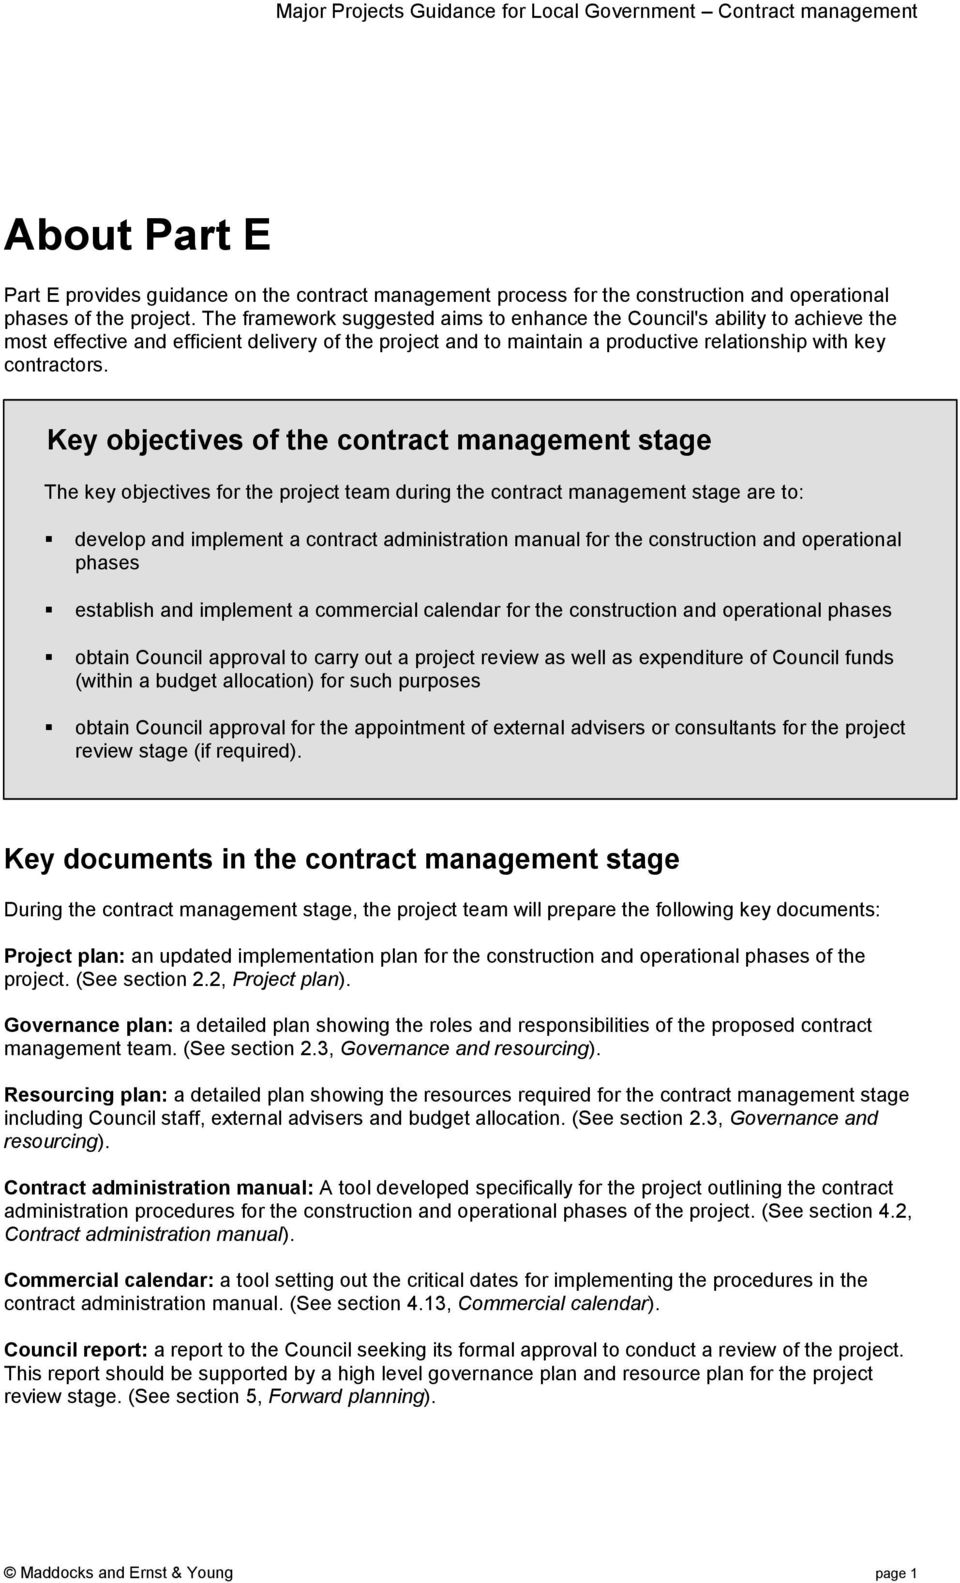 Key objectives of the contract management stage The key objectives for the project team during the contract management stage are to: develop and implement a contract administration manual for the